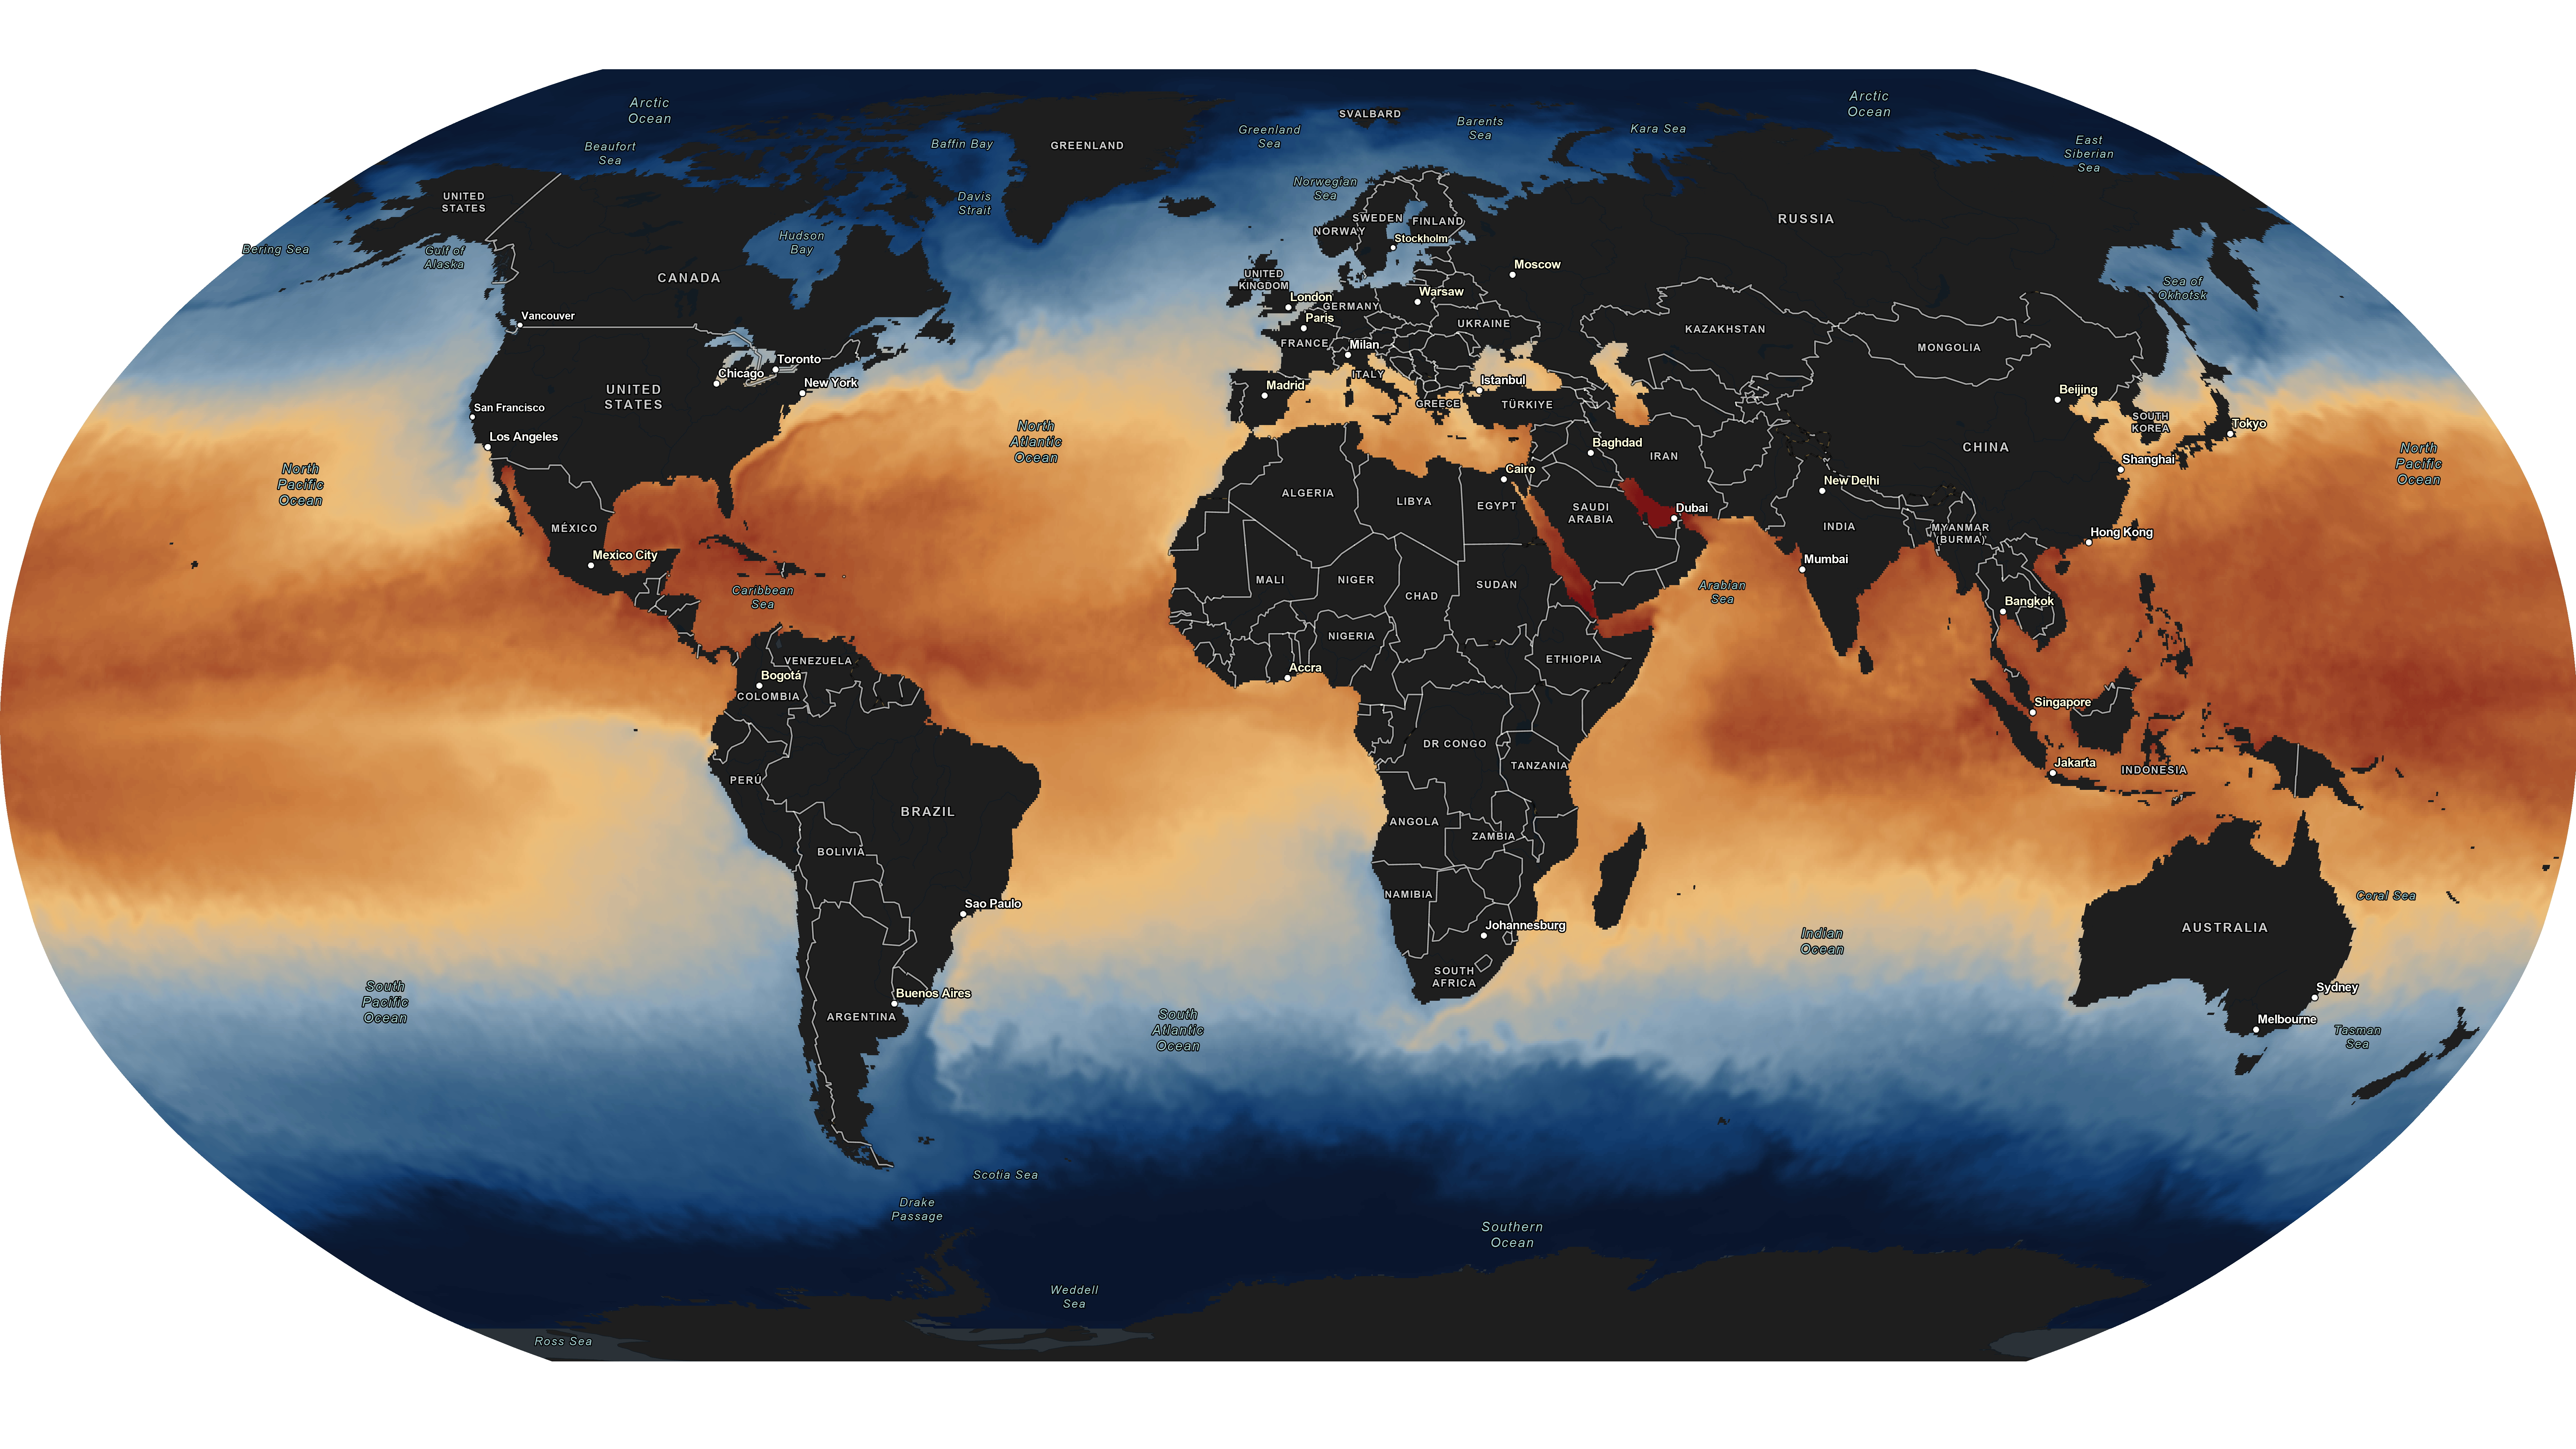 Global sea surface temperature detected daily from satellites.